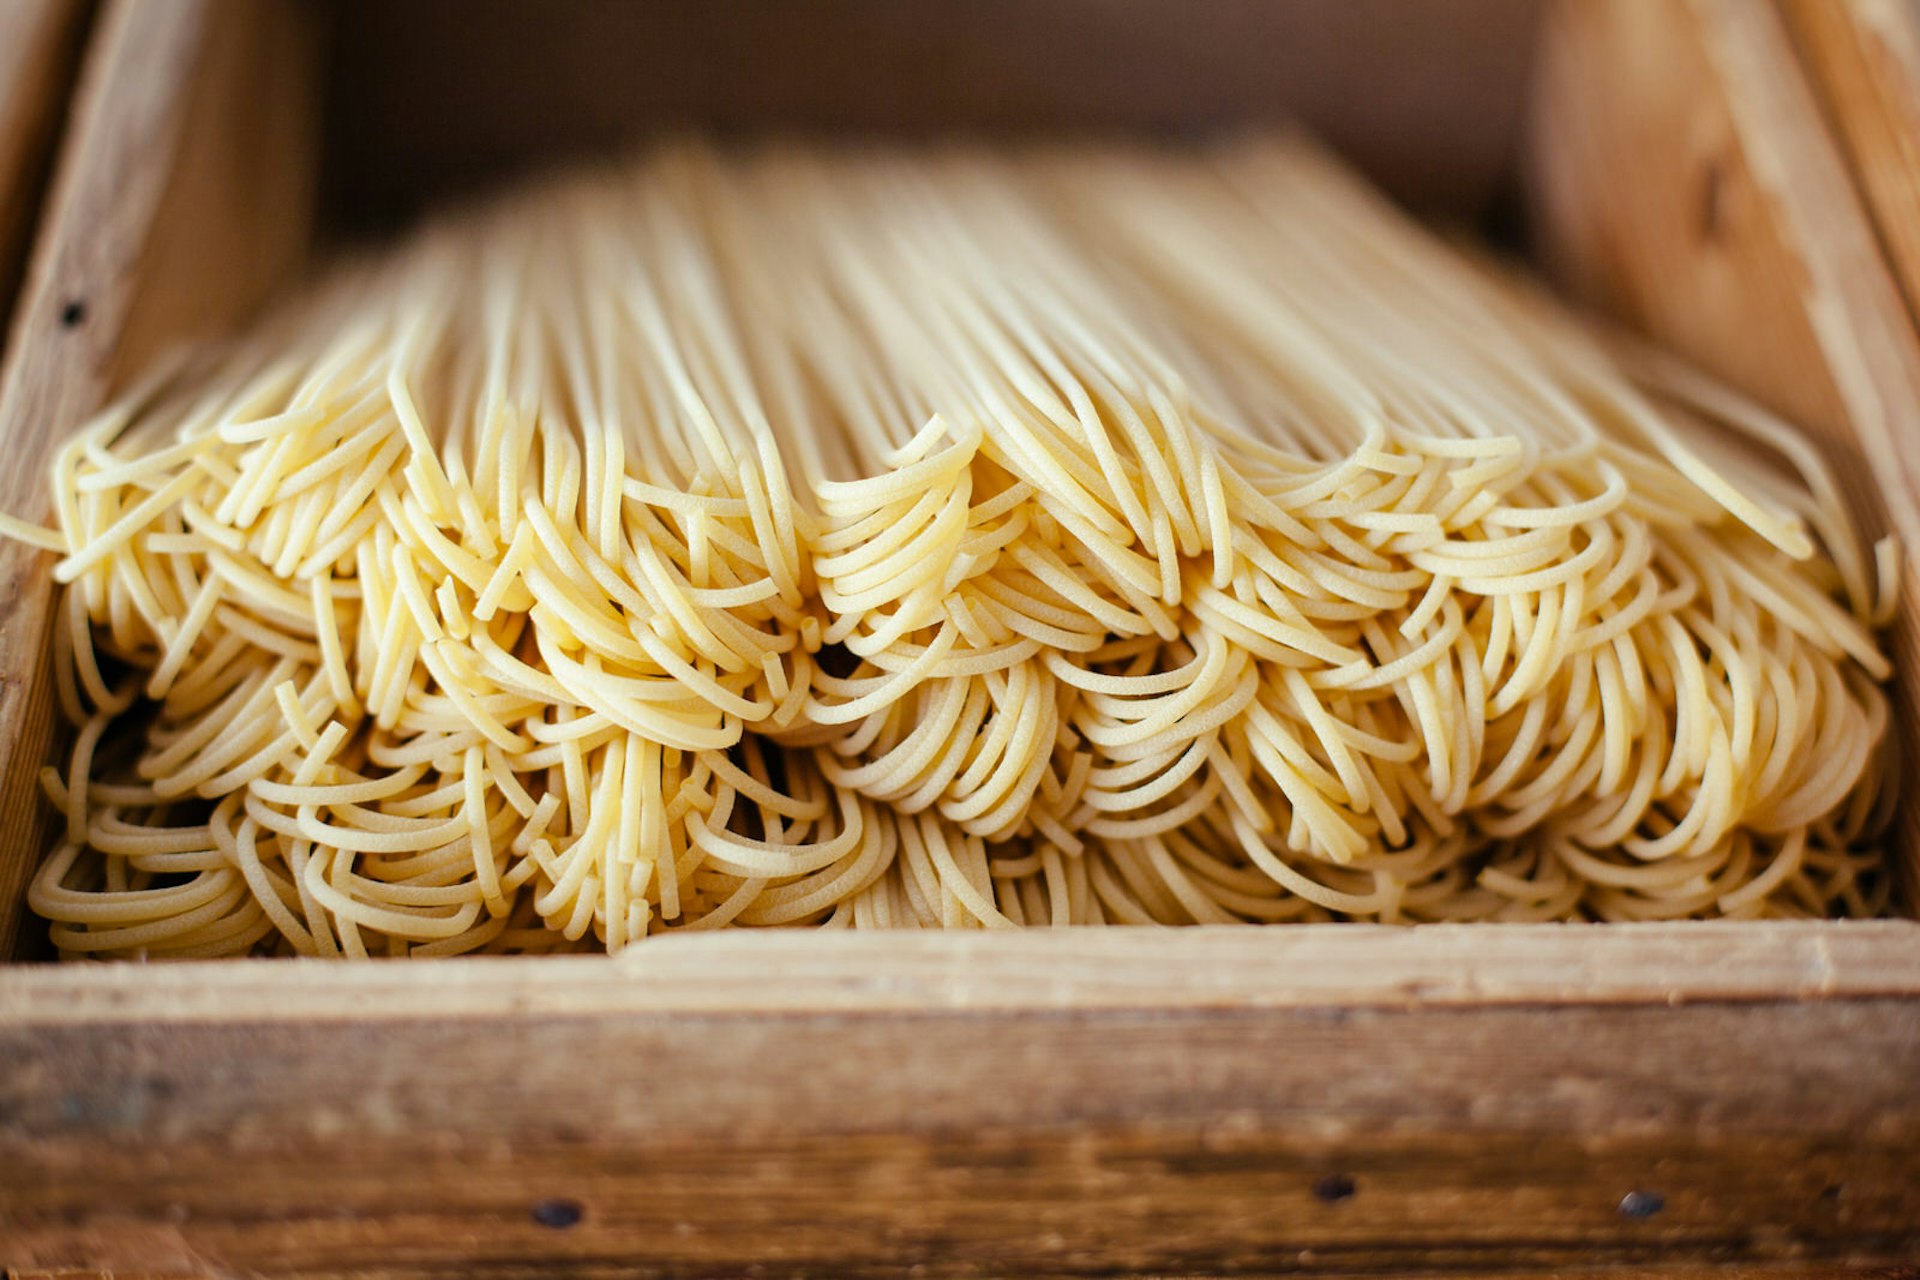 Head to Italy for spaghetti done right © Sofie Delauw / Getty Images